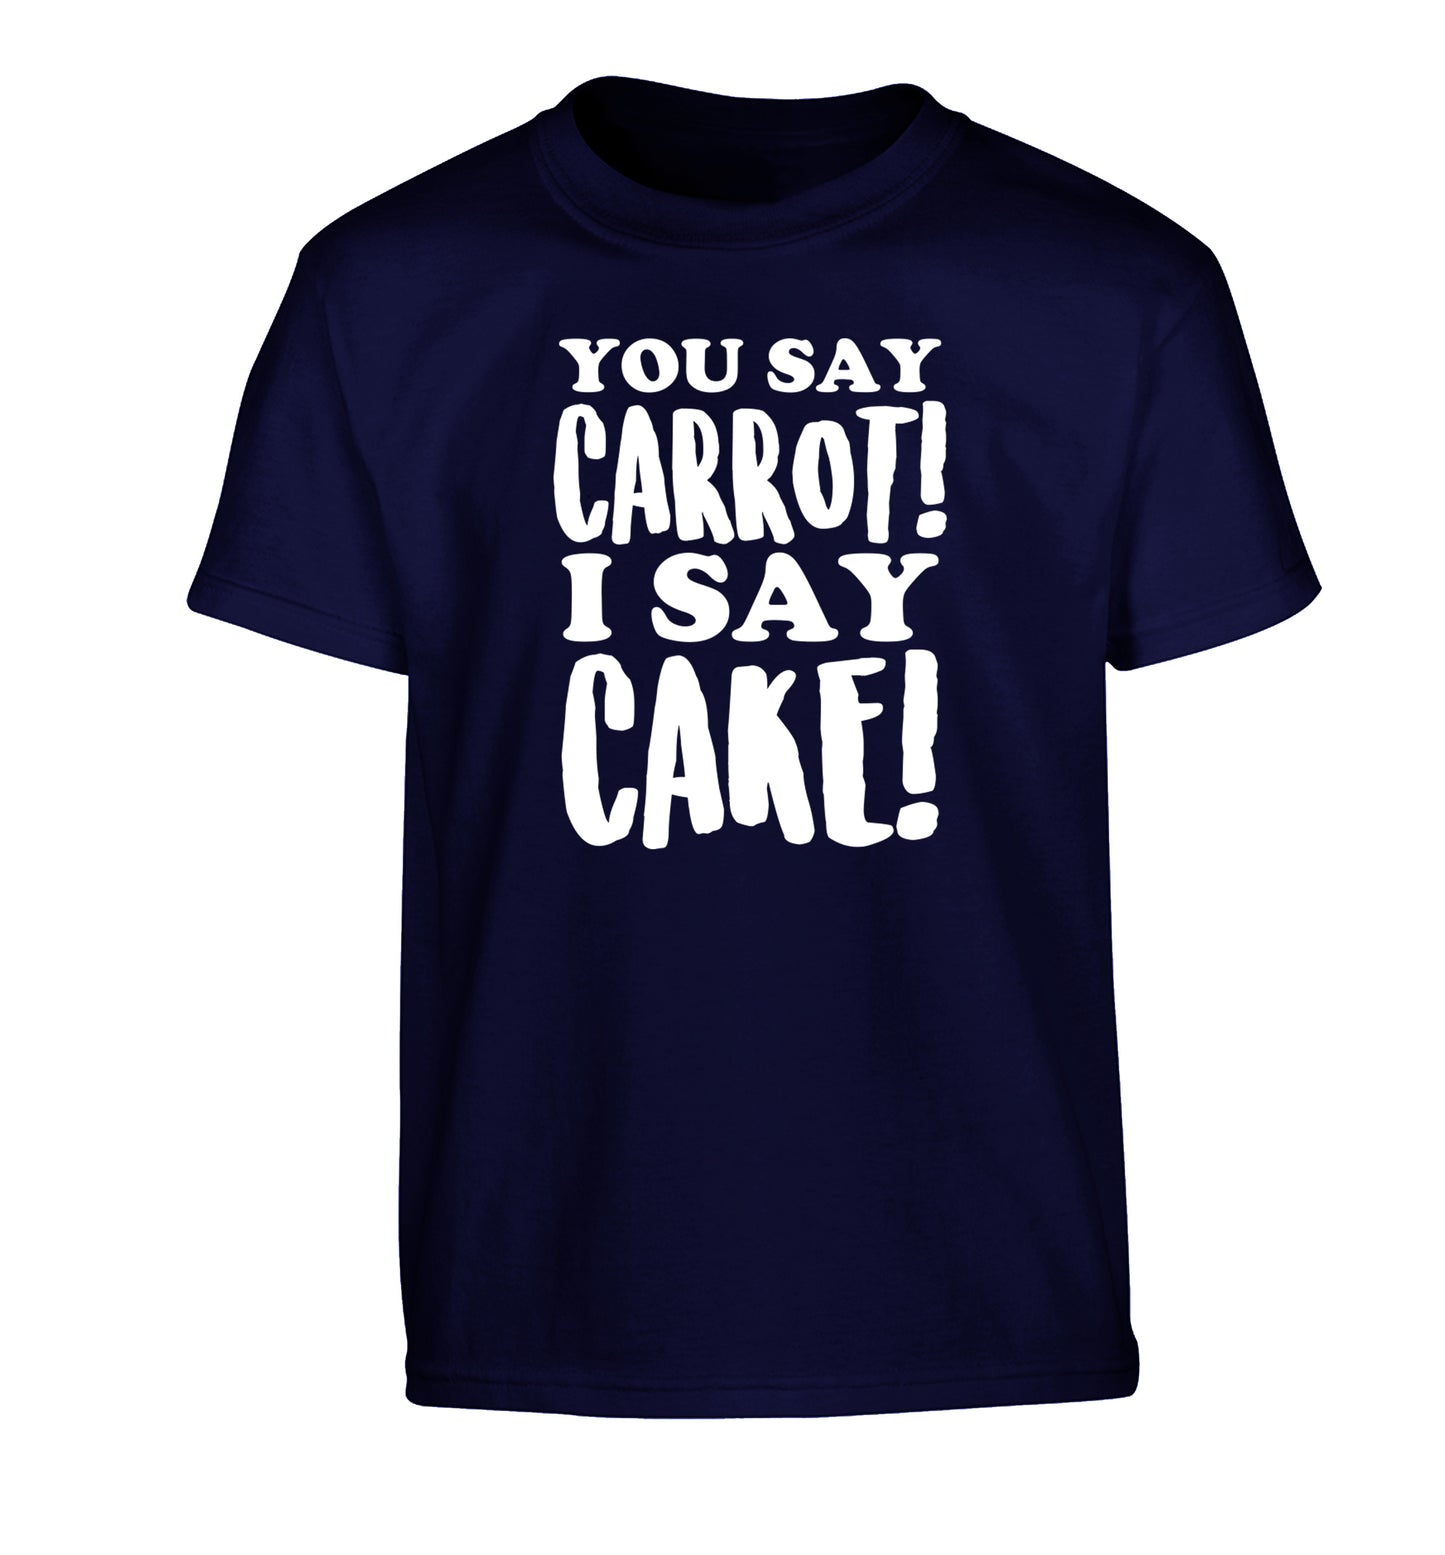 You say carrot I say cake! Children's navy Tshirt 12-14 Years